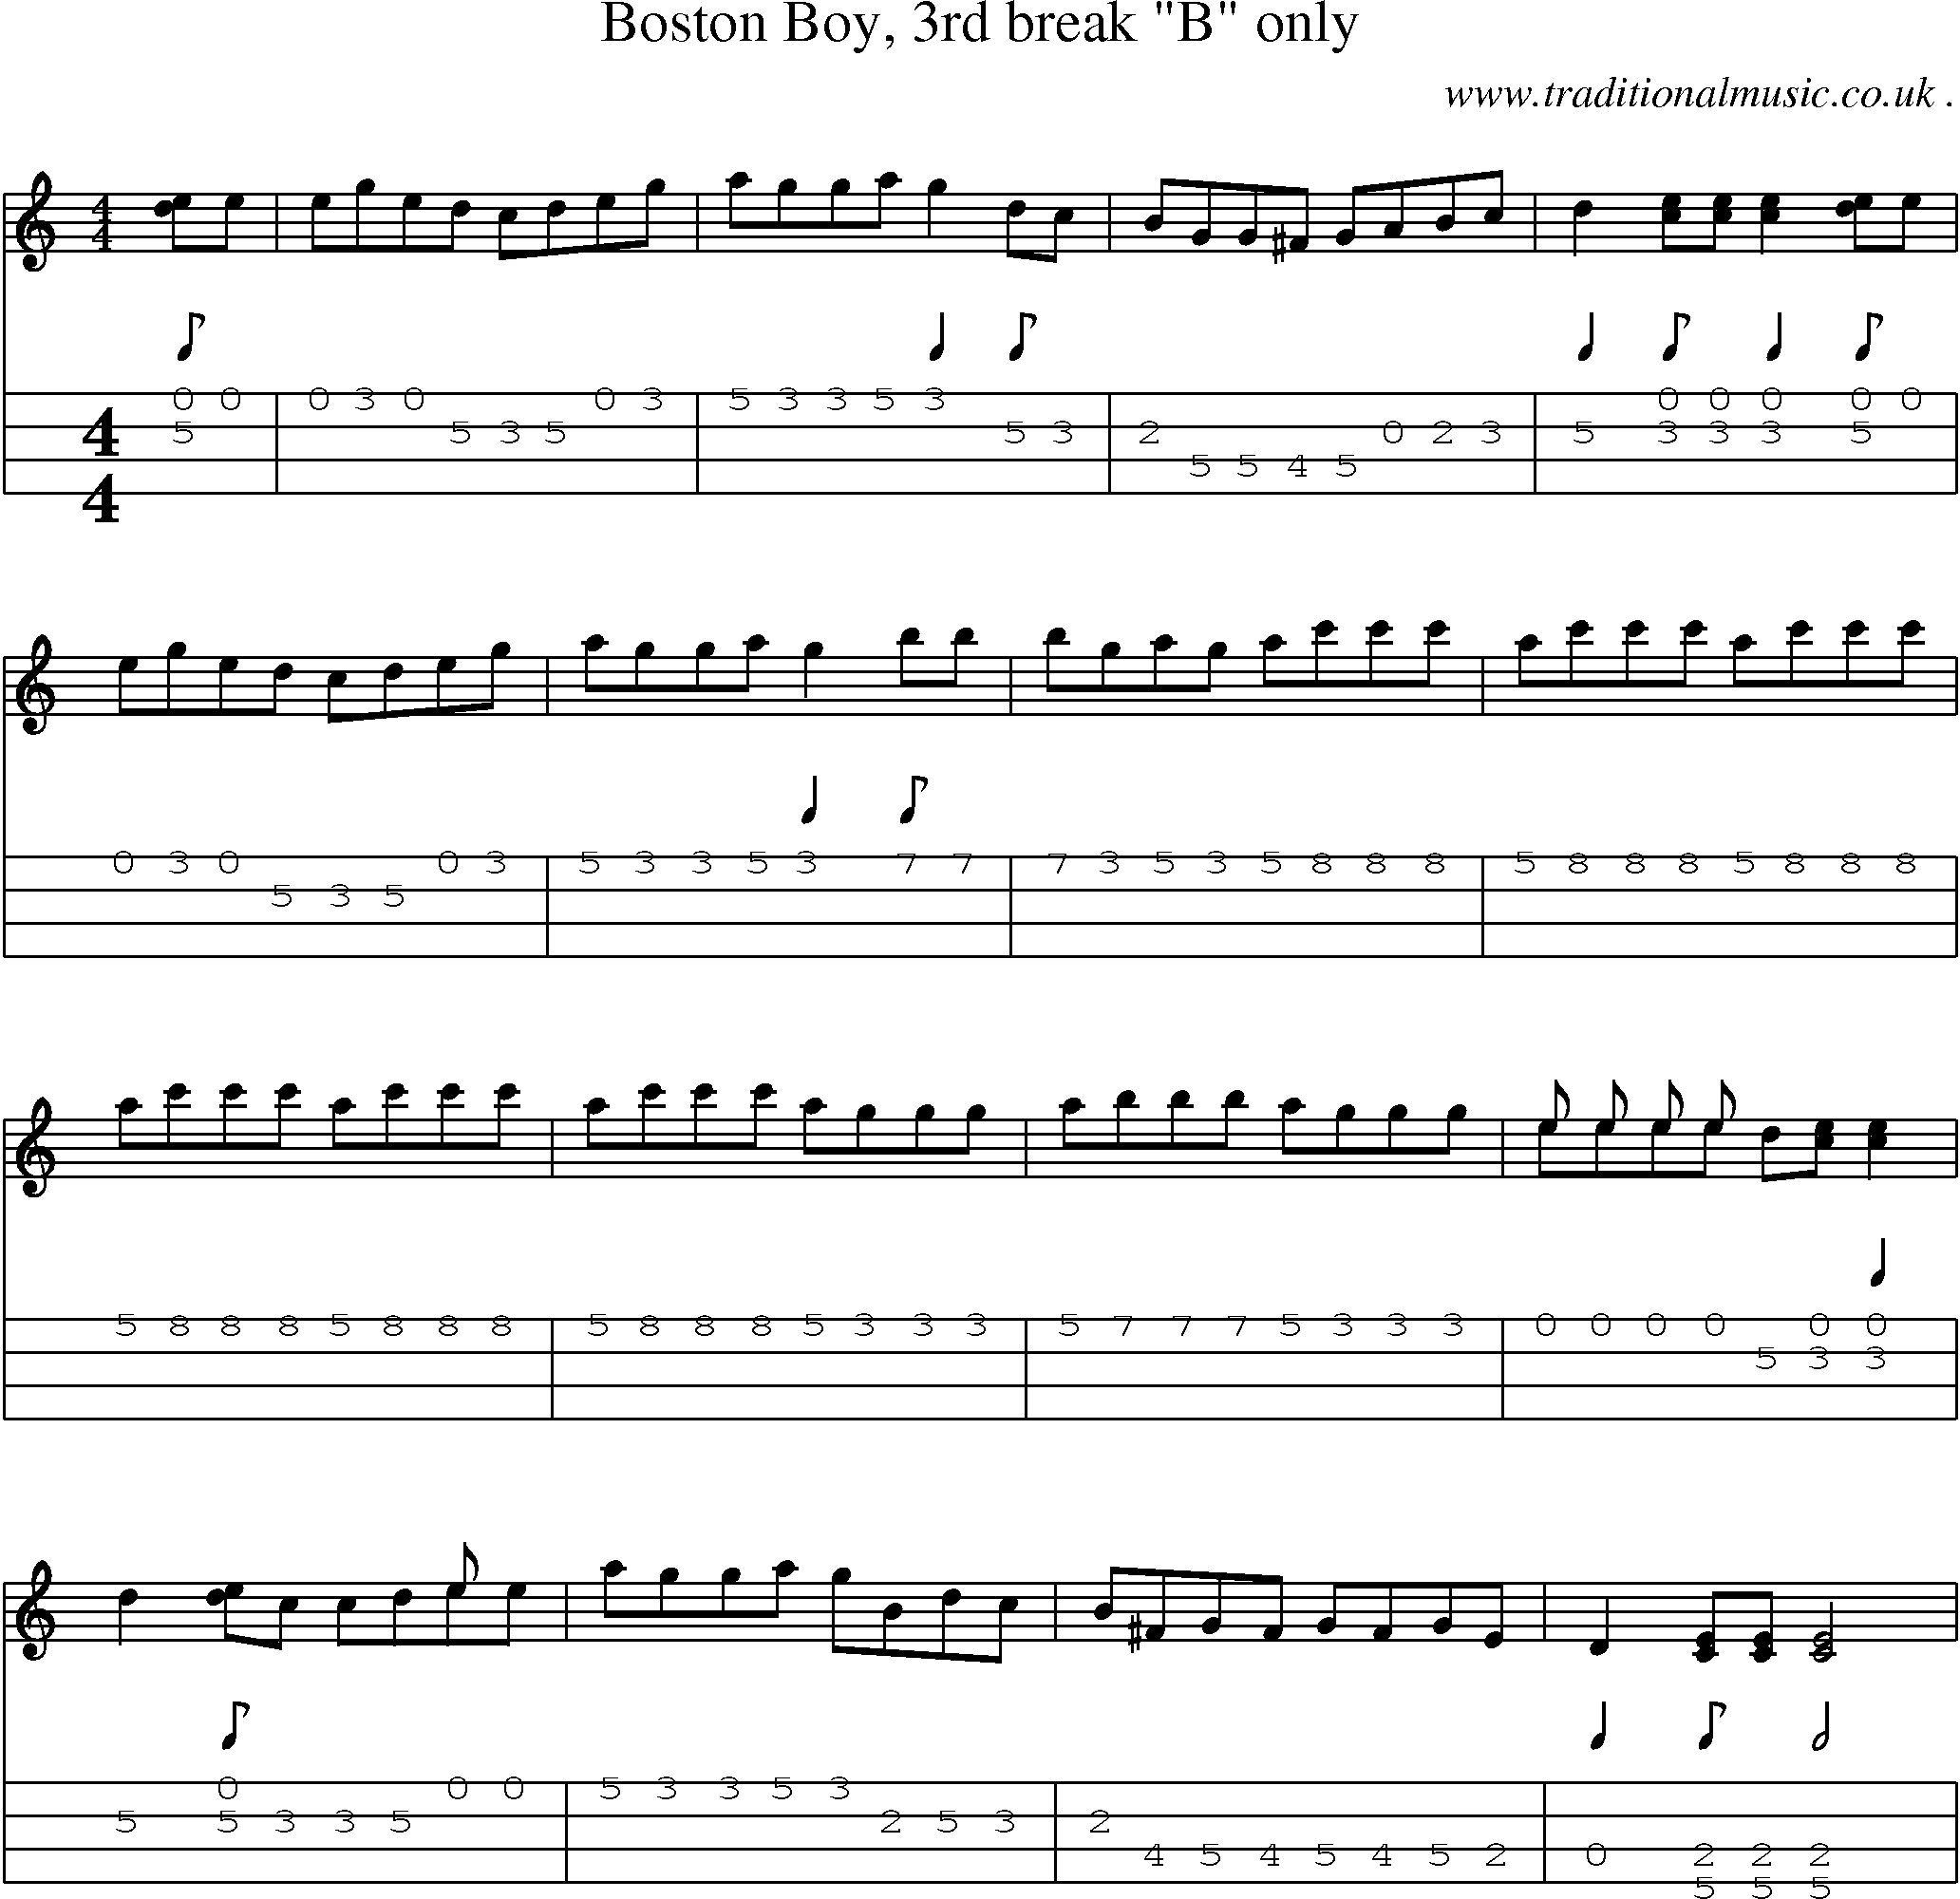 Music Score and Guitar Tabs for Boston Boy 3rd Break B Only